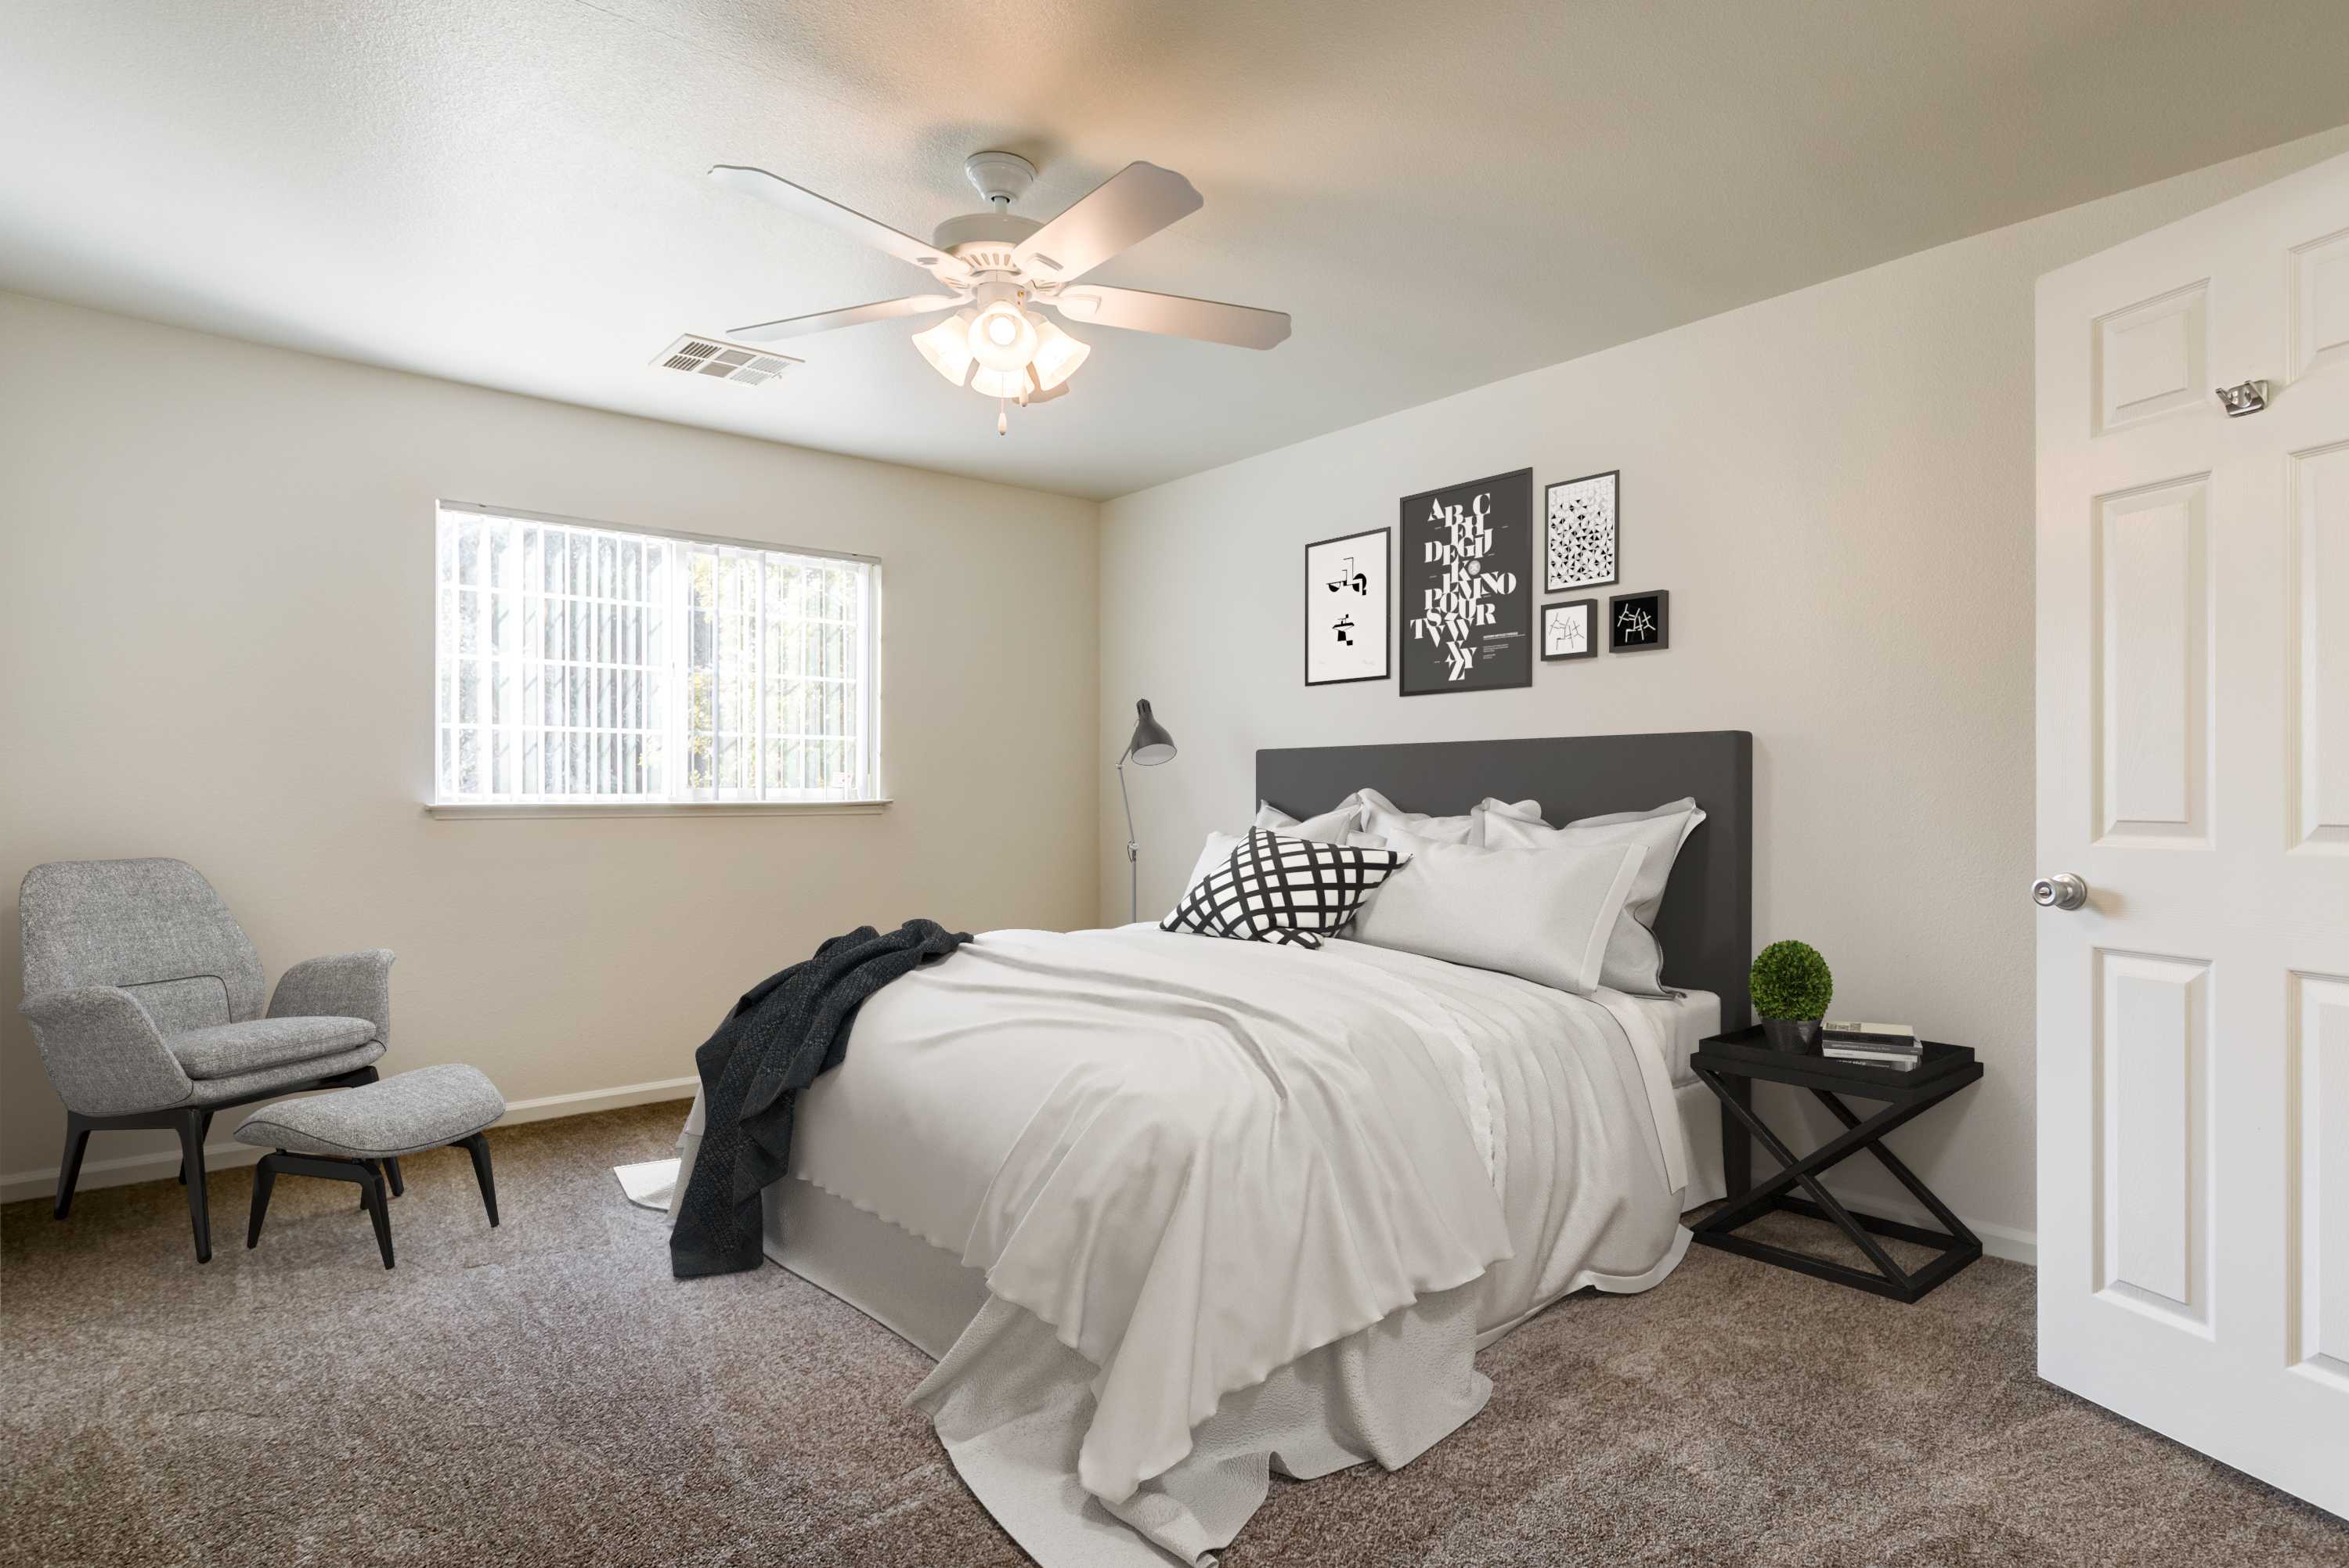 A furnished bedroom at Stone Park in Lemoore, California